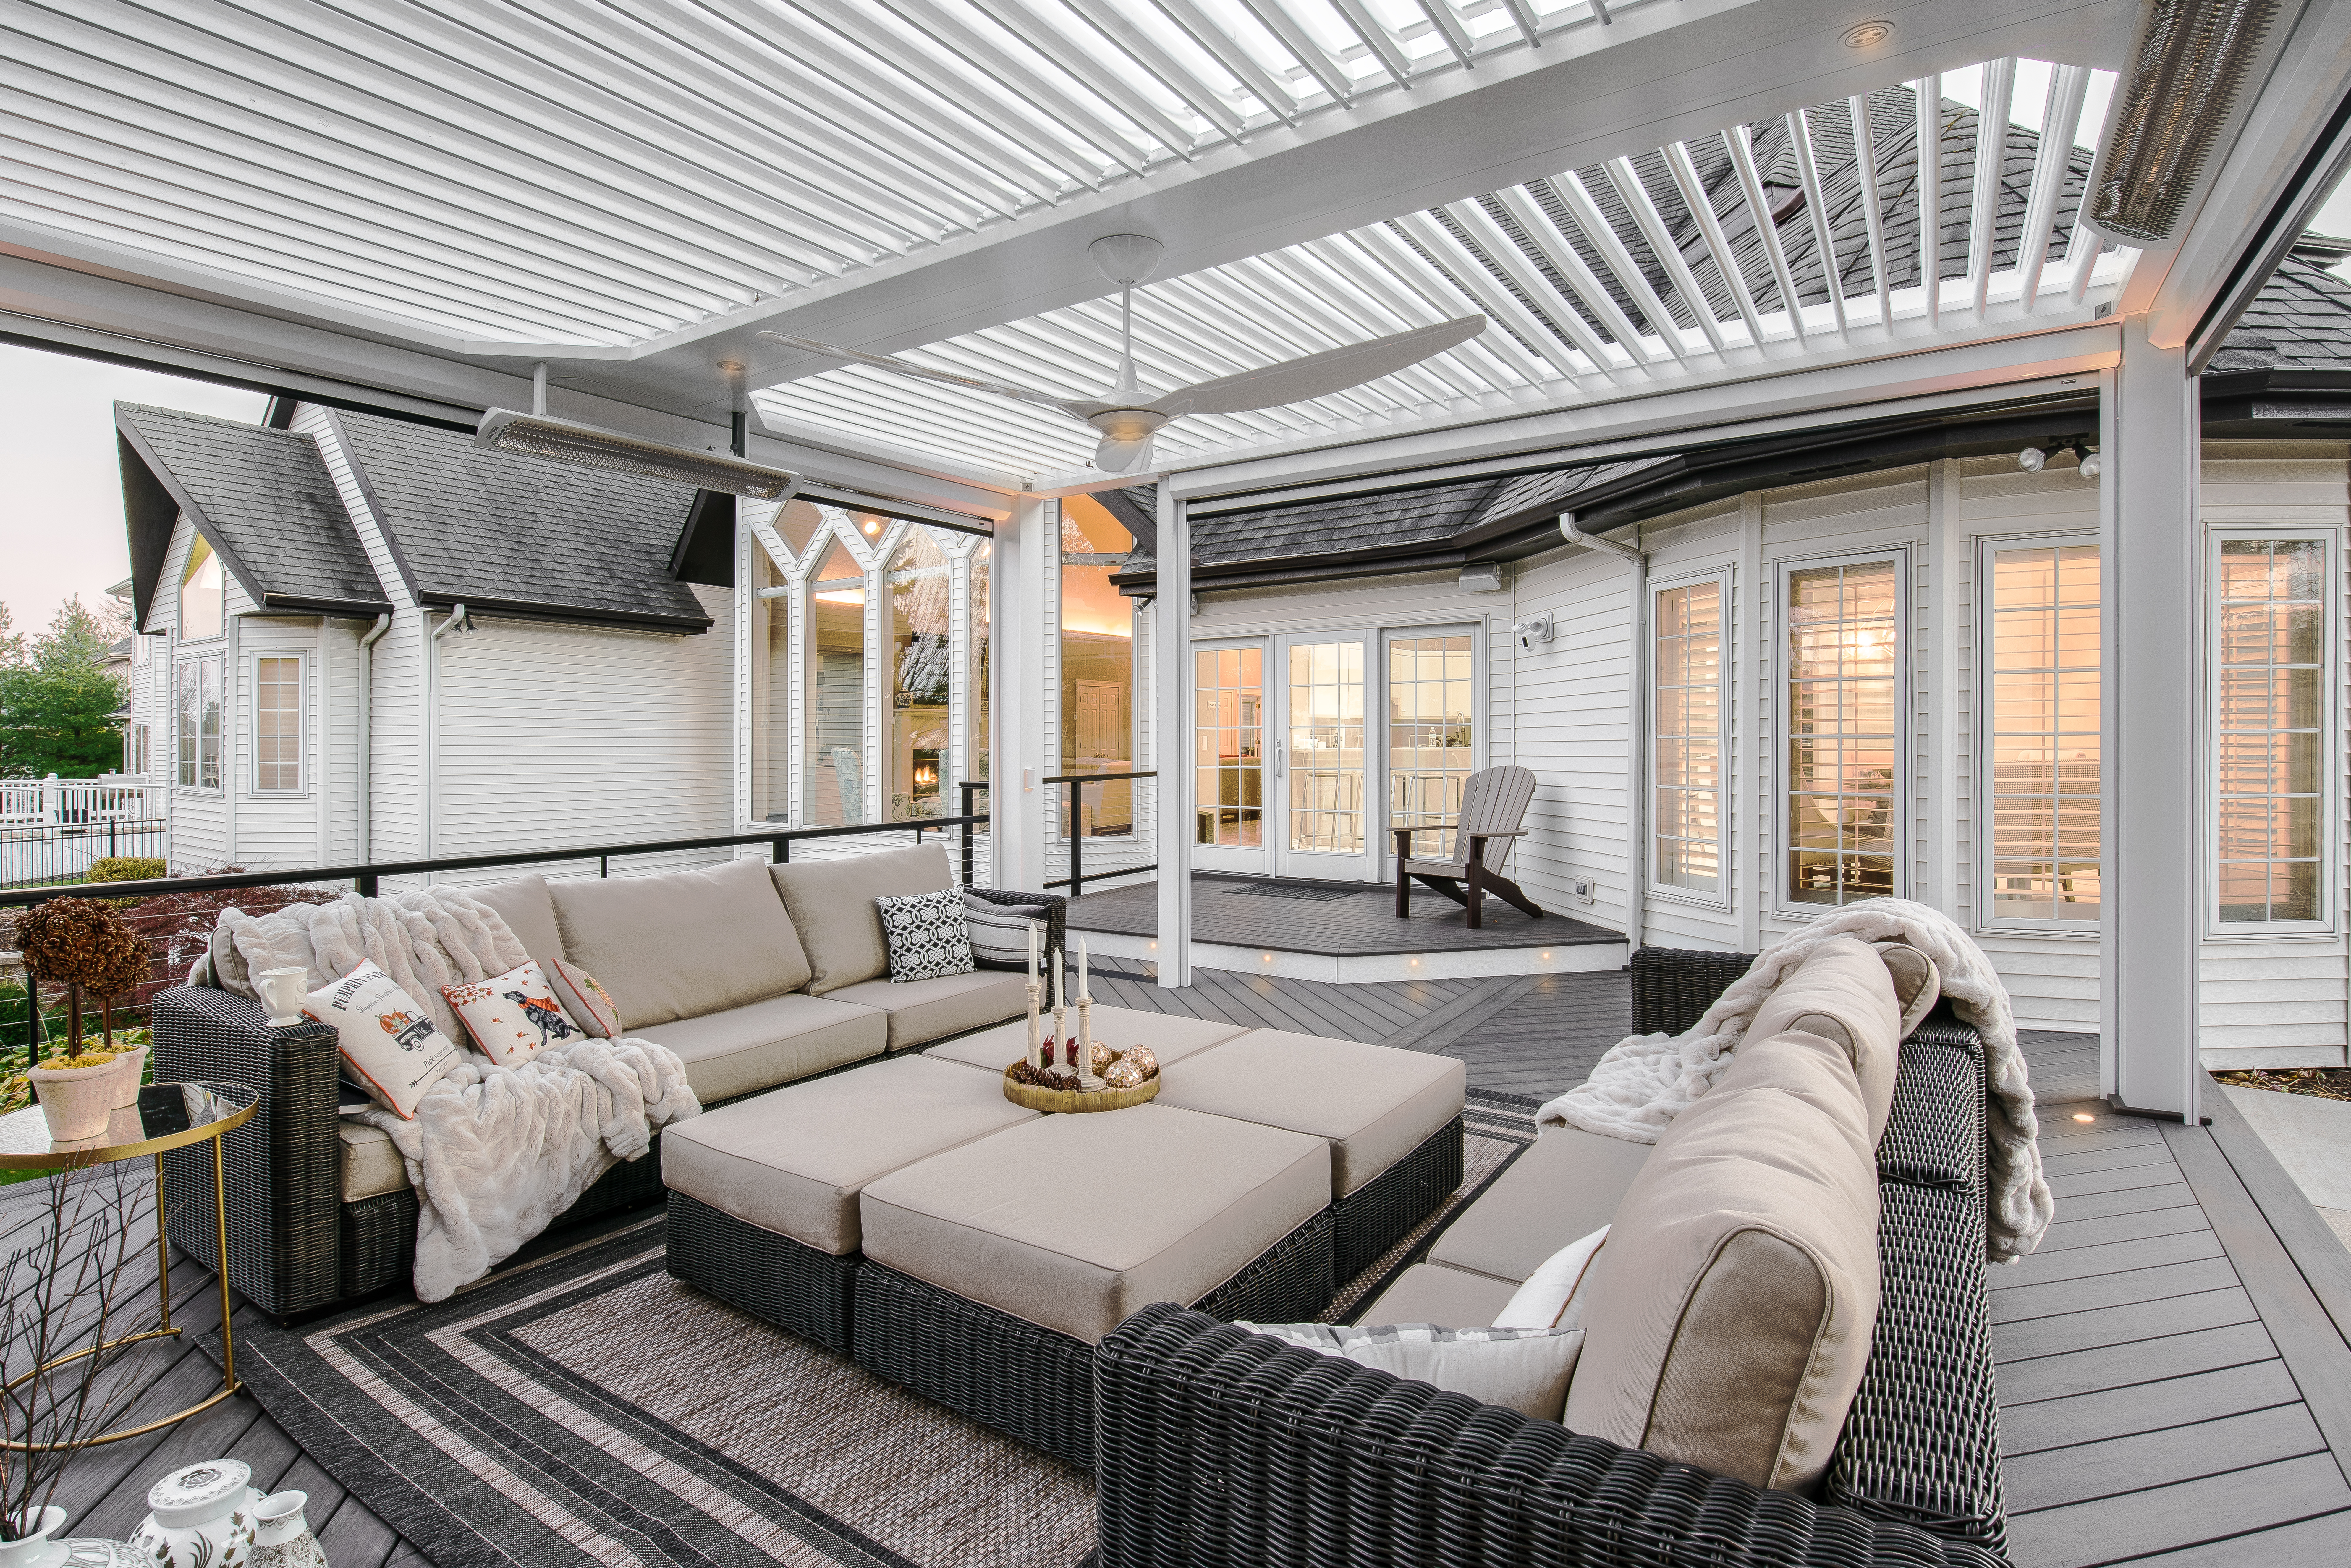 A cozy outdoor space under a pergola, bathed in warm sunlight, inviting relaxation and connection with nature